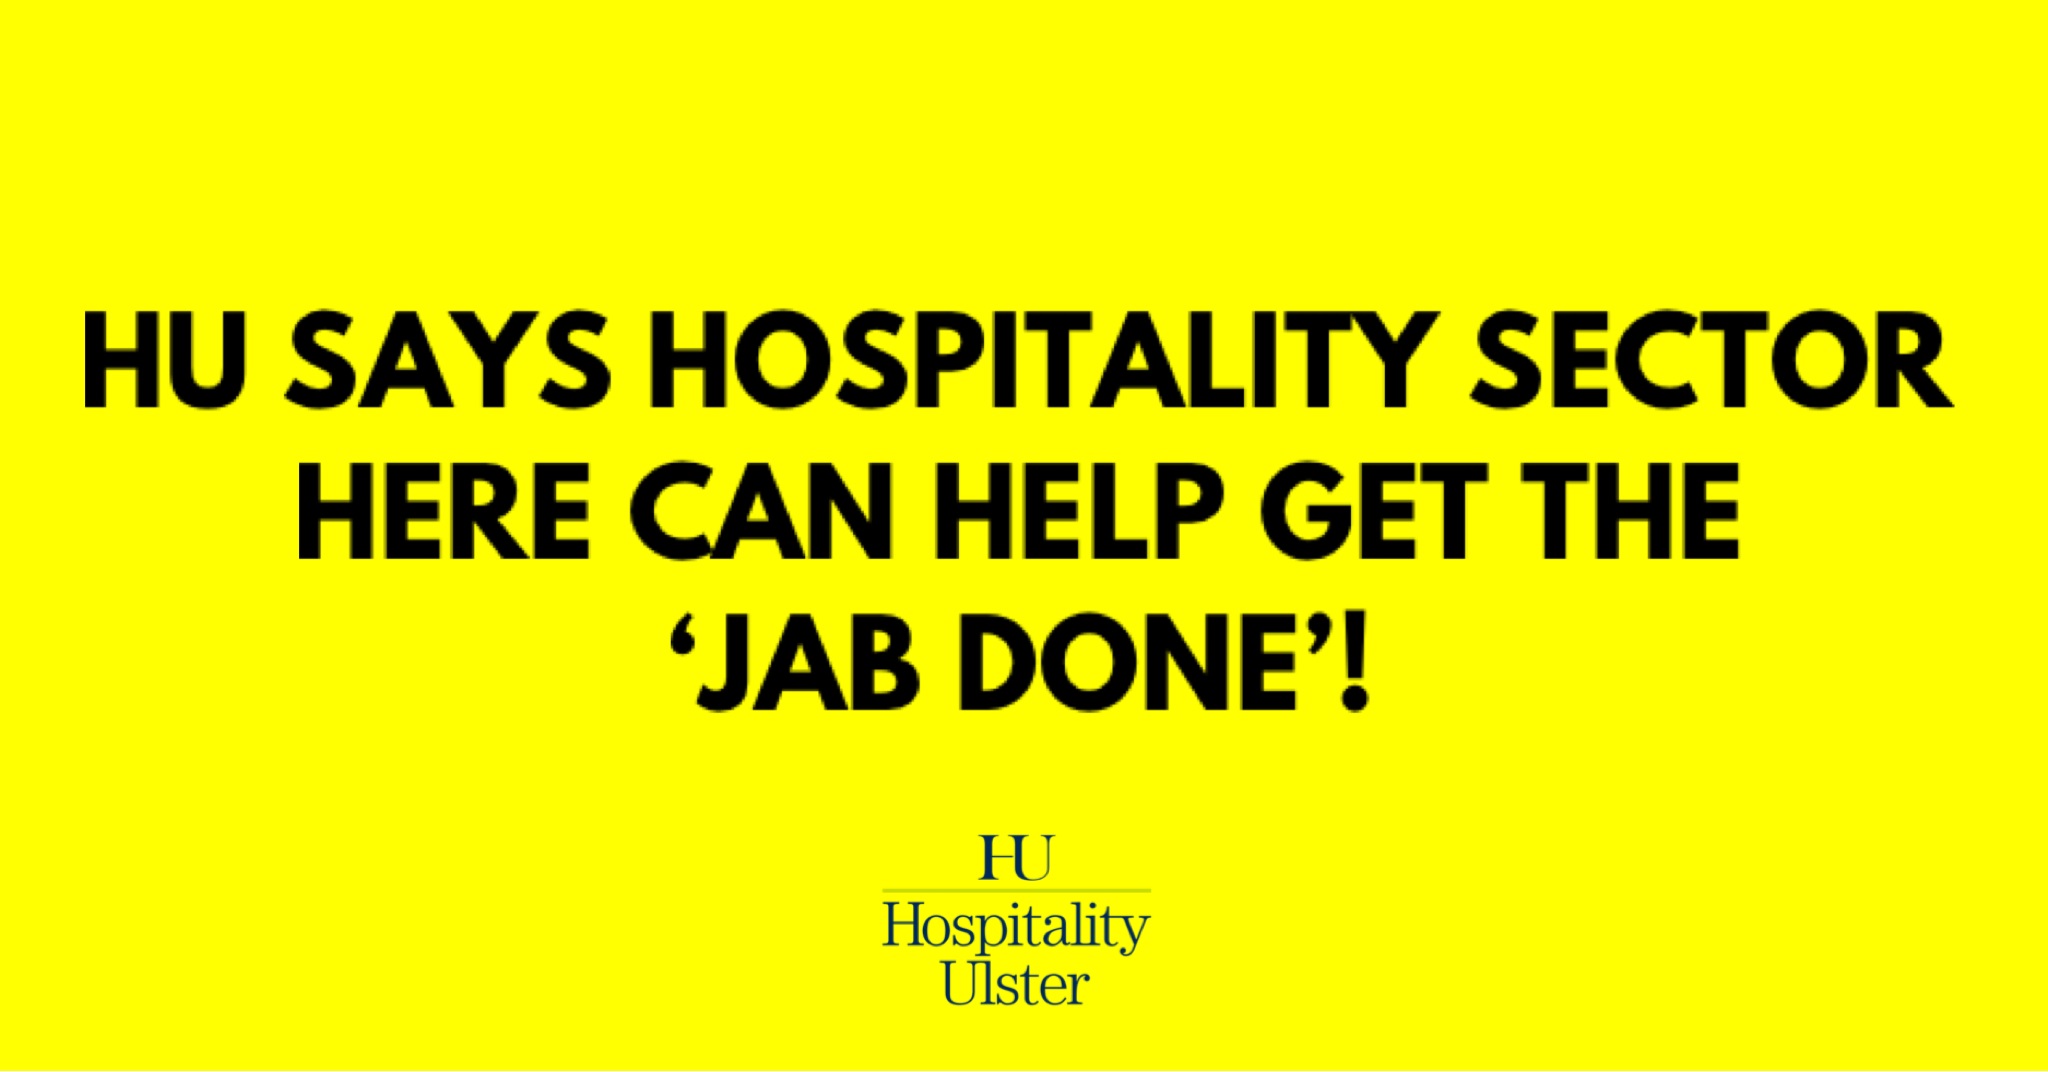 HU SAYS HOSPITALITY SECTOR HERE CAN HELP GET THE JAB DONE